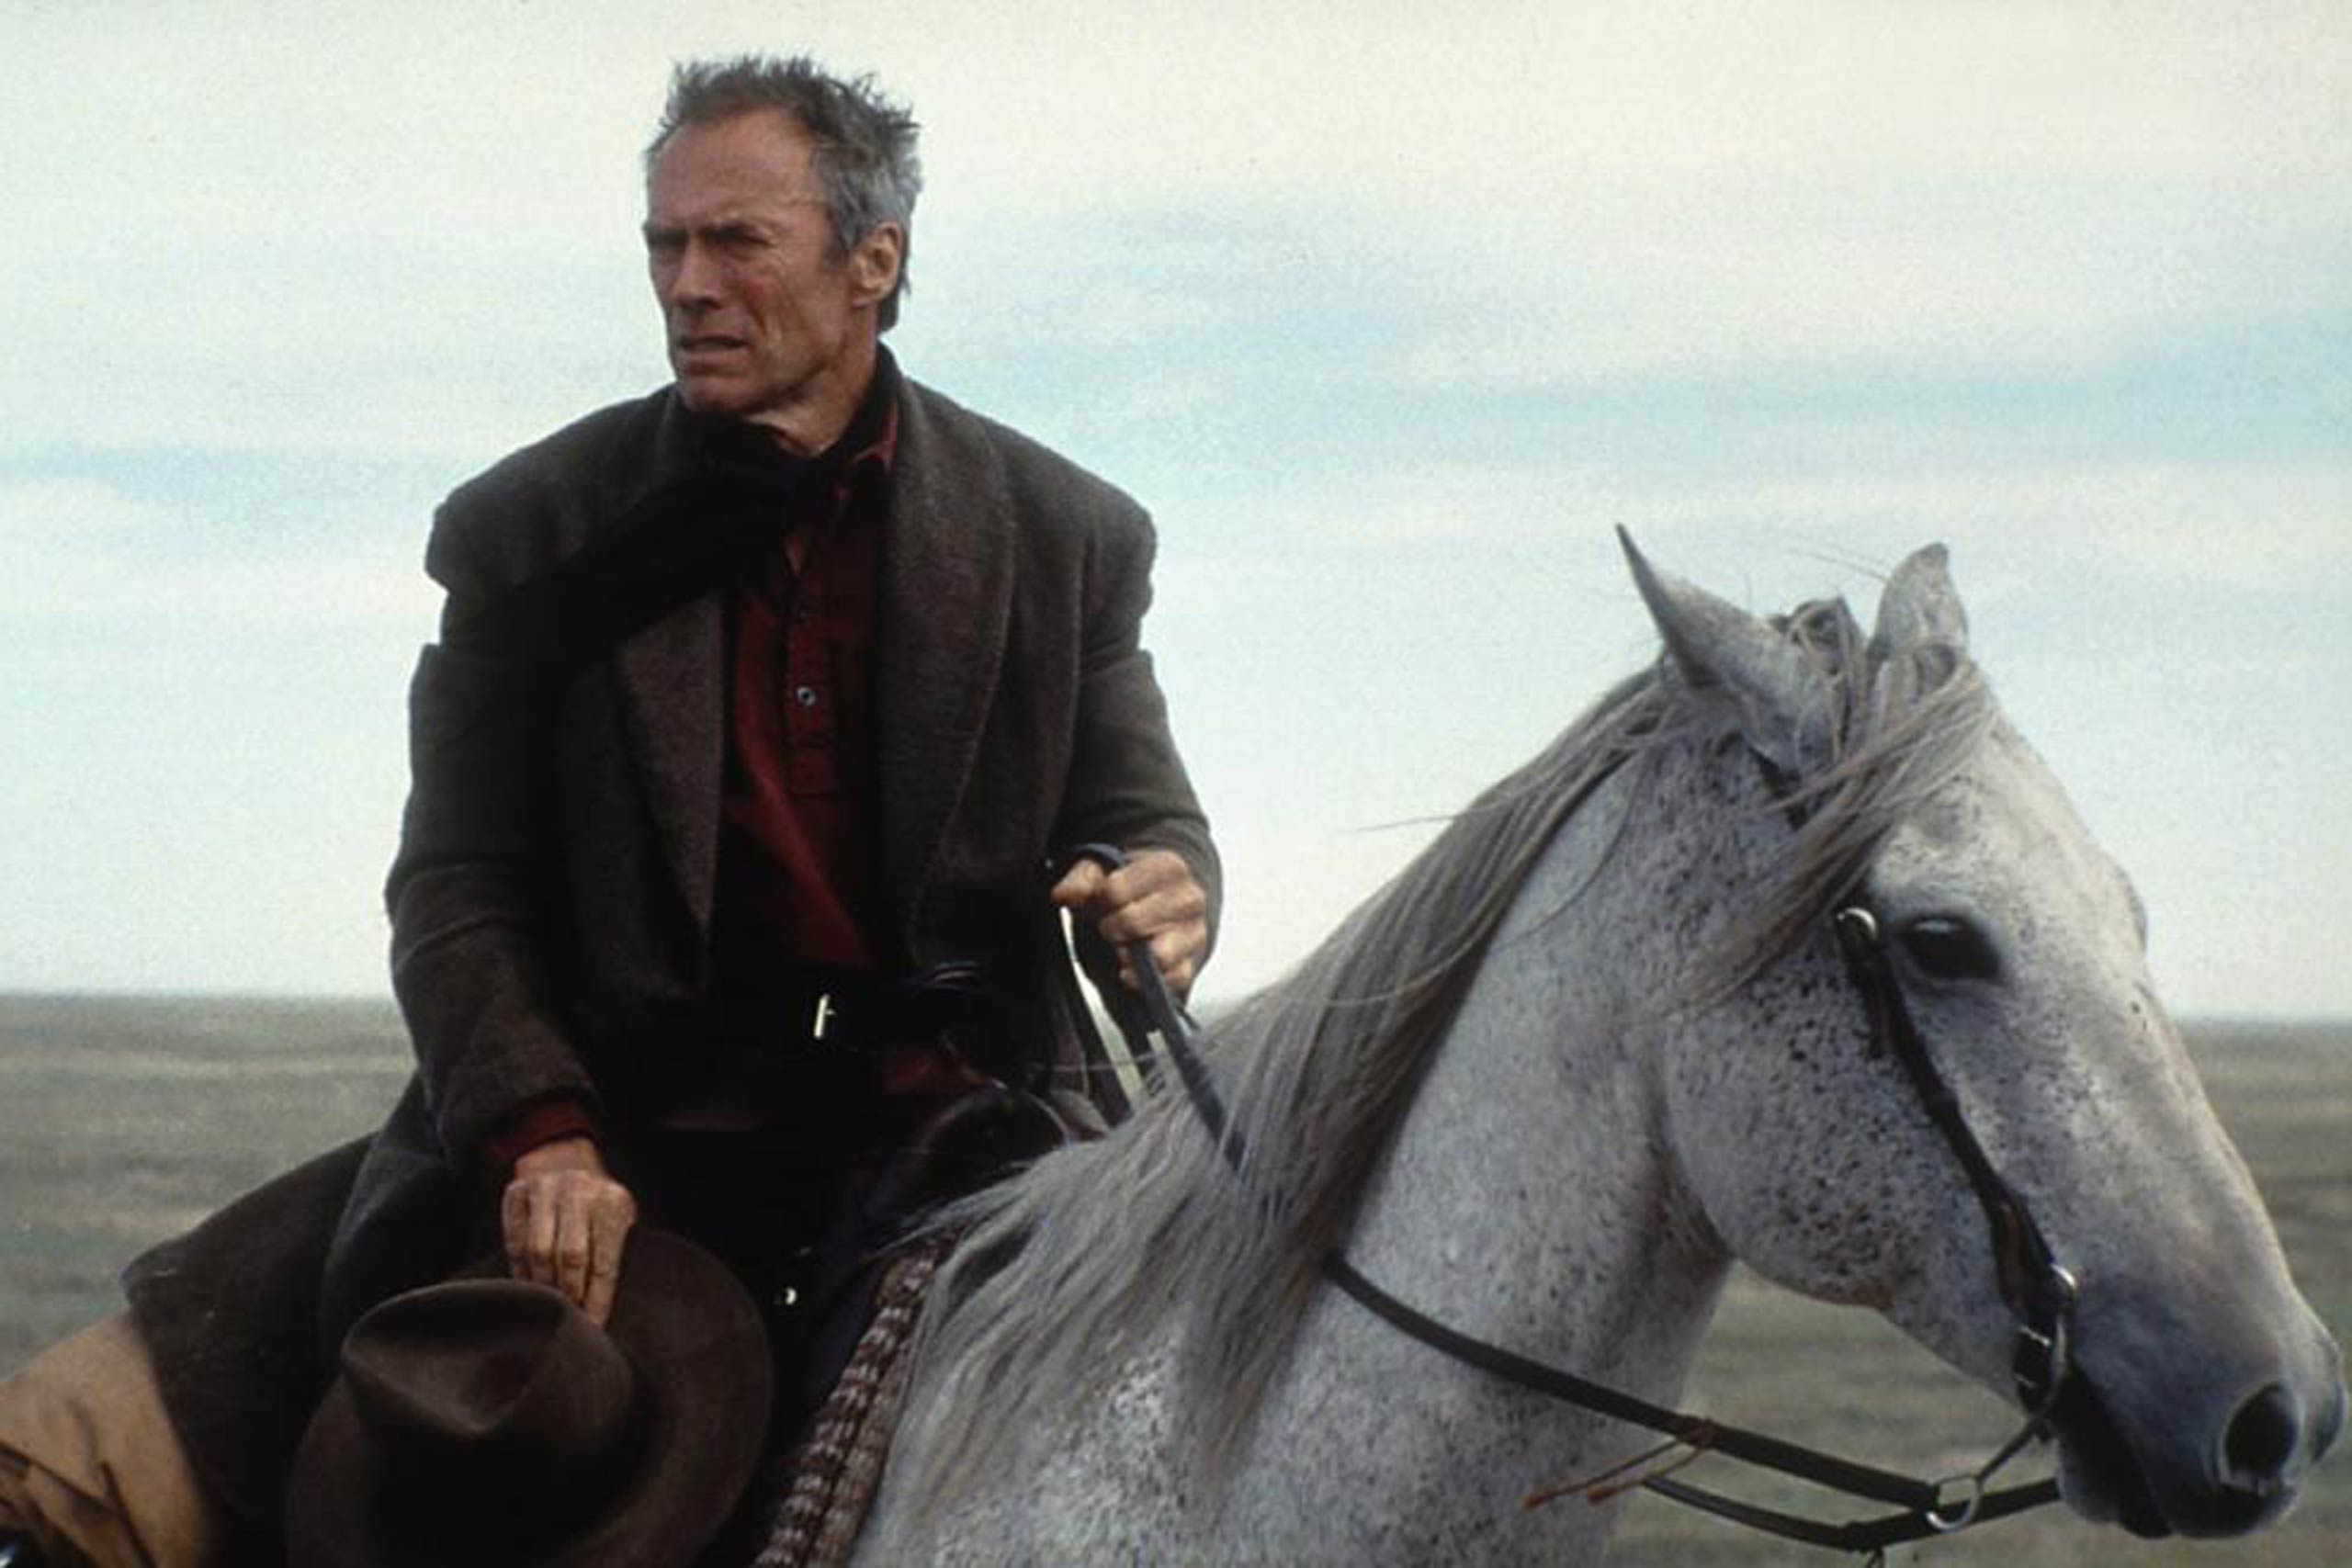 Unforgiven, 1992 Eastwood's first western since Pale Rider in 1985 is a dark, passionate drama with good guys so twisted and bad guys so persuasive that virtue and villainy become two views of the same soul. But it is also Eastwood's meditation on the burdens of age, repute, courage, heroism — on Clintessence. The movie takes its time letting you watch the aging gunfighter, Will Munny, turn into Clint. And when he does, it's not thrilling but scary. At the end he threatens to  come back and kill everyone.  Will says he's doing it all for the money. But it's really because a man's job is his life. Will shoots people. Clint shoots westerns. And for once, the Hollywood establishment took notice, awarding the film Oscars for Best Picture and Best Director (Eastwood) and the renegade star an Oscar nomination as Best Actor. After nearly 40 years in the movie business, these were his first-ever Academy Award citations.